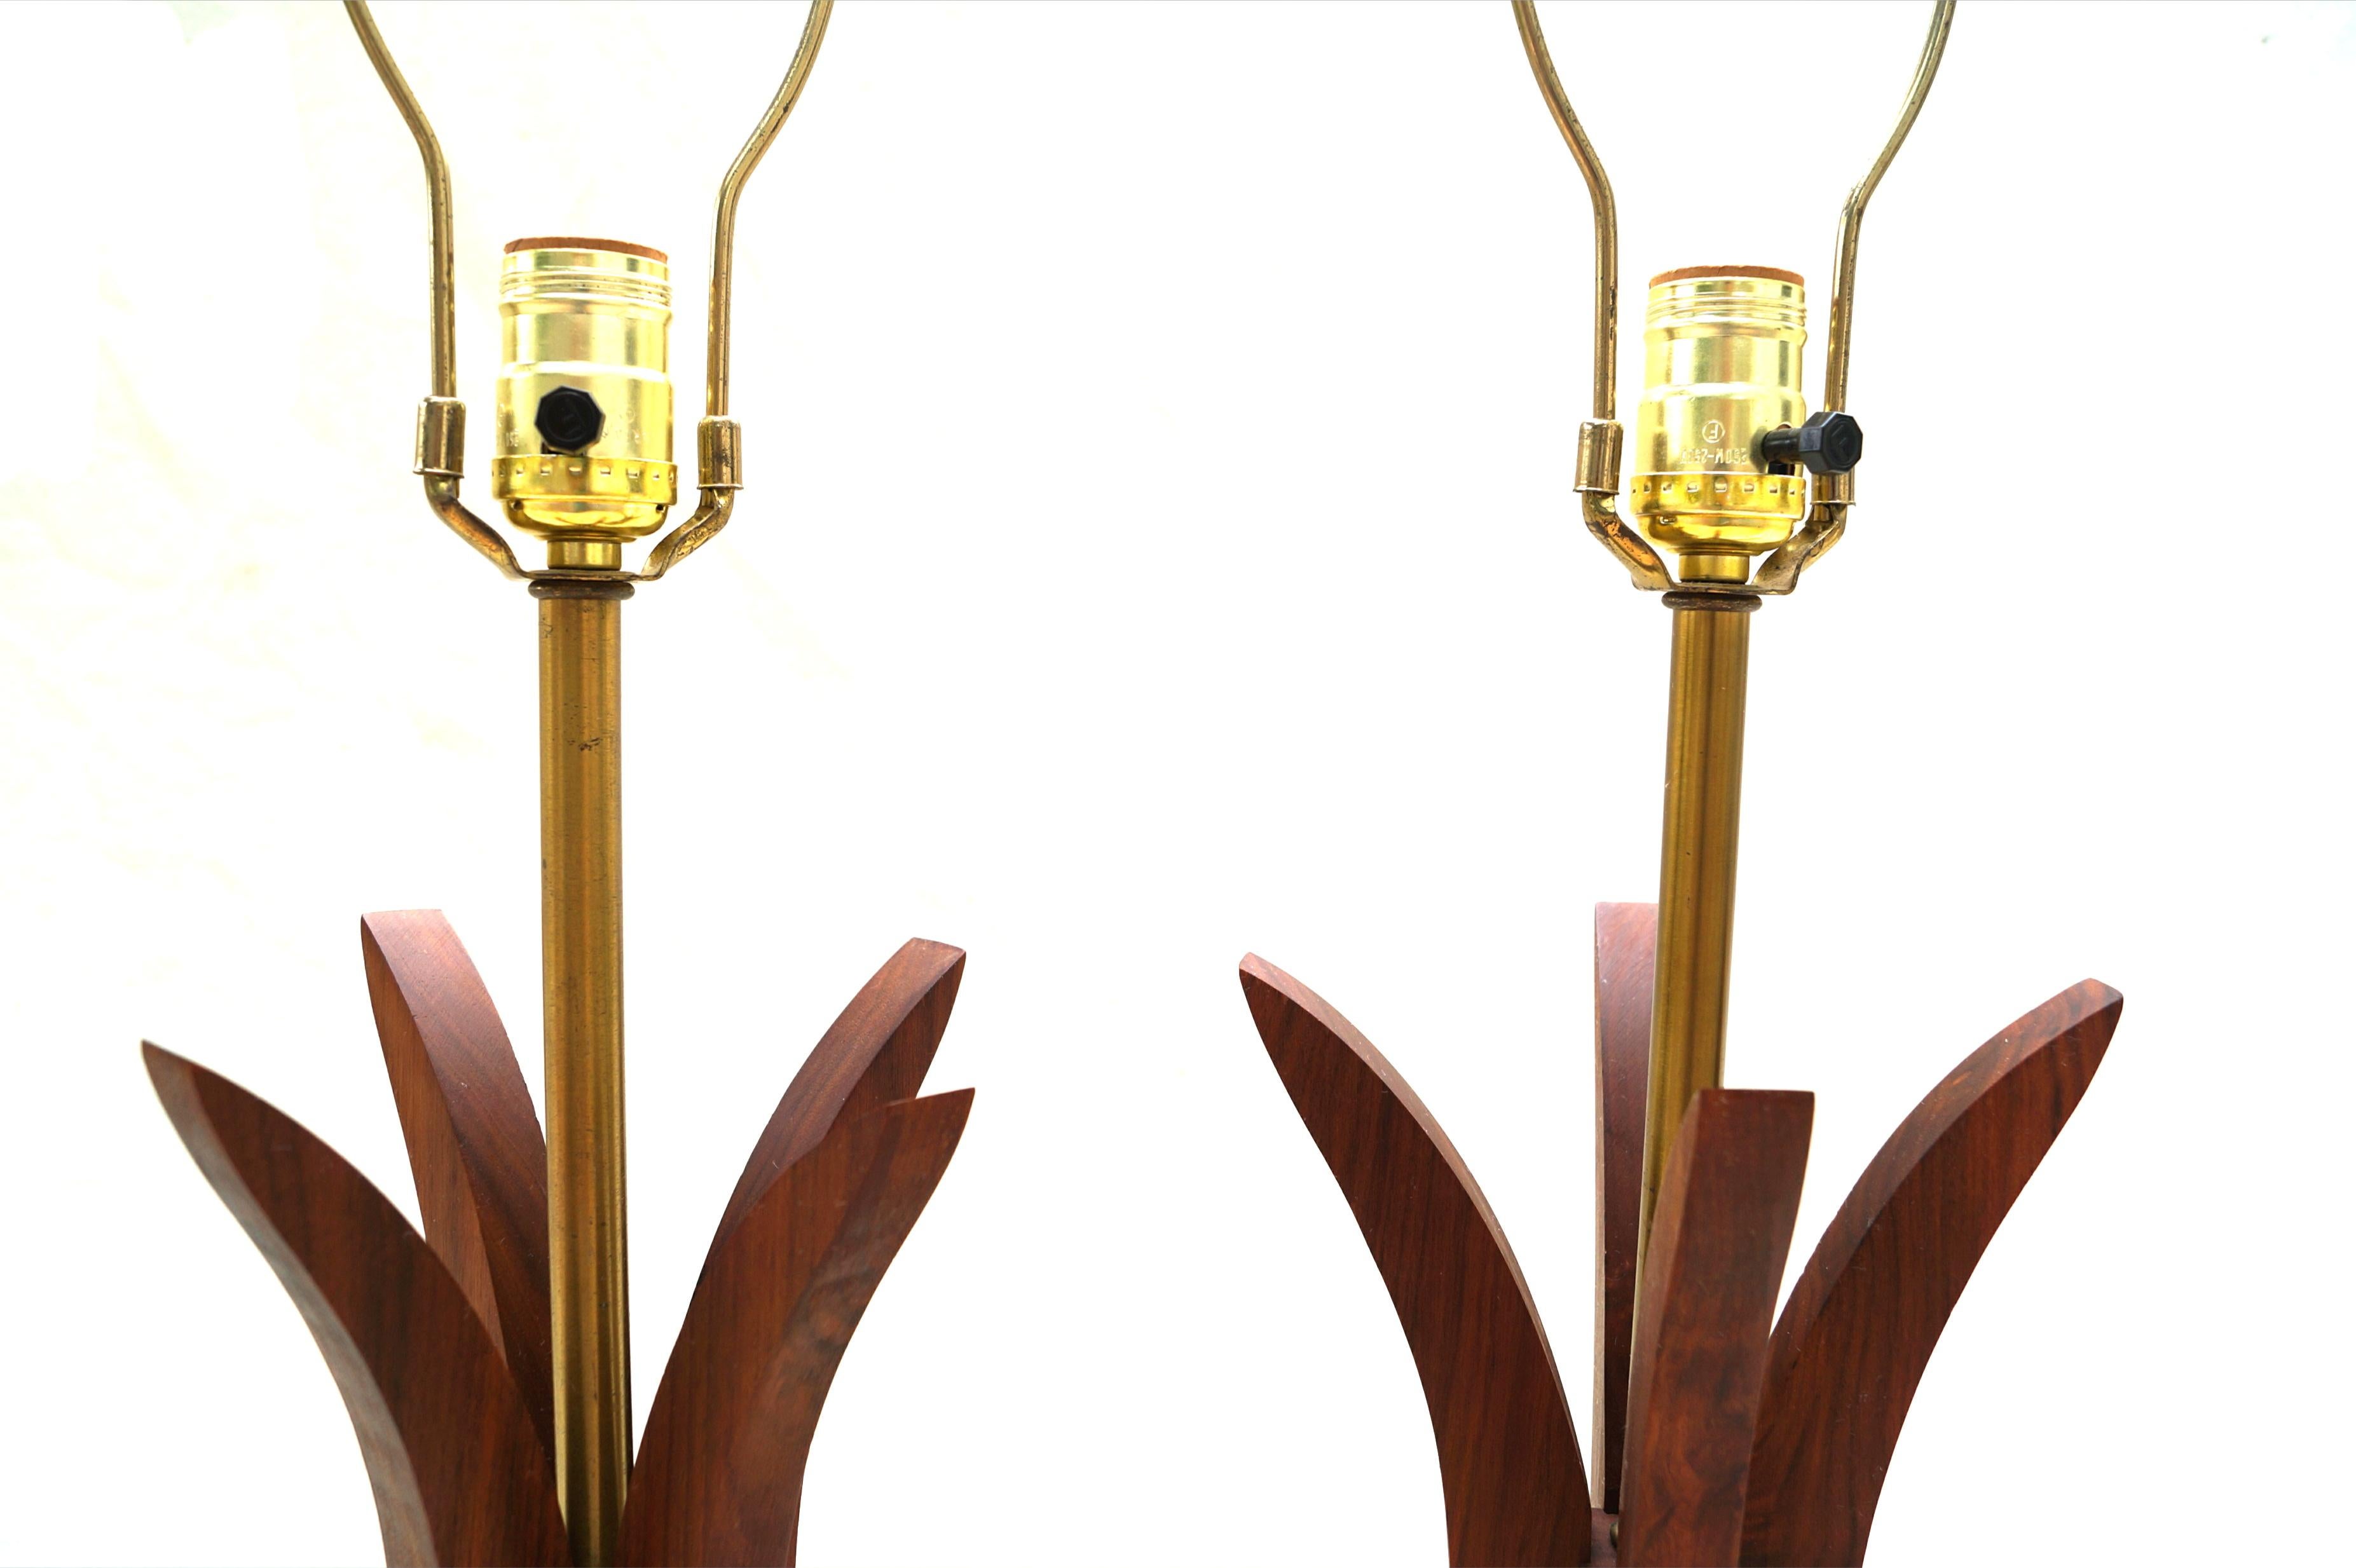 Pair of Adrian Pearsall Attrib Sculptural Table Lamps Danish Mid-Century Modern In Good Condition For Sale In Wayne, NJ